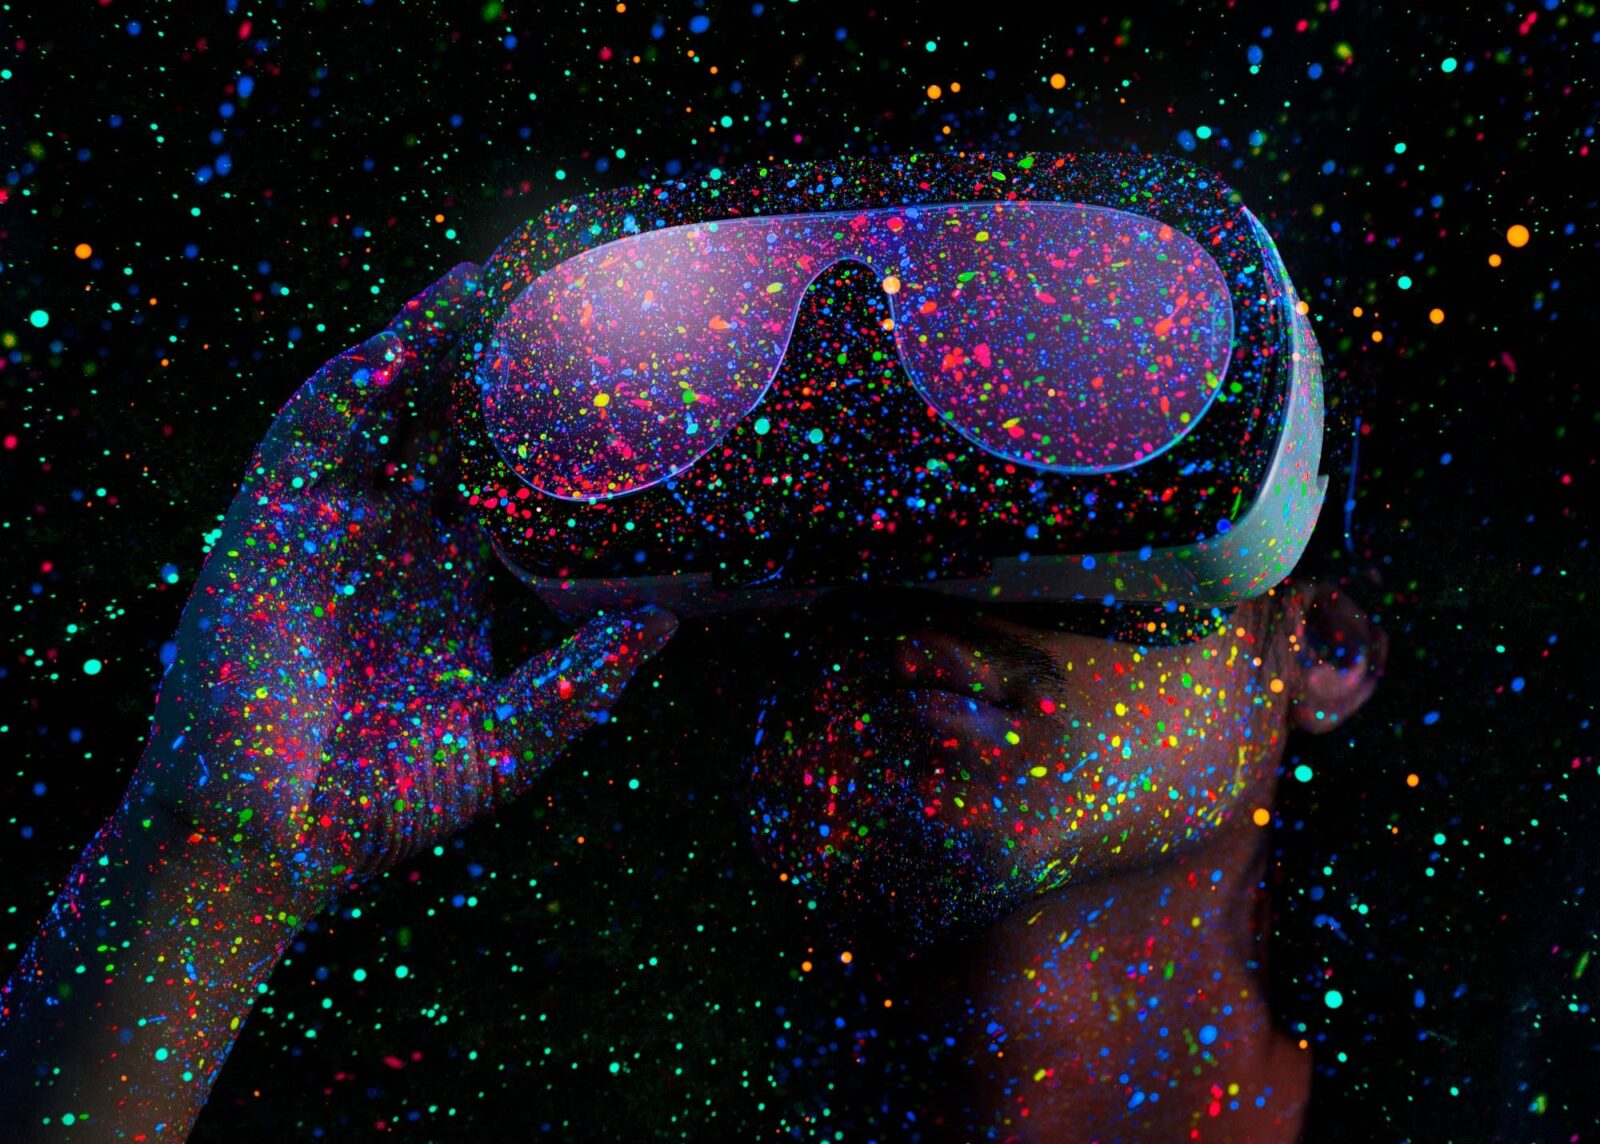 Photo of a person wearing a VR headset. Dots of coloured light are speckled across the image.